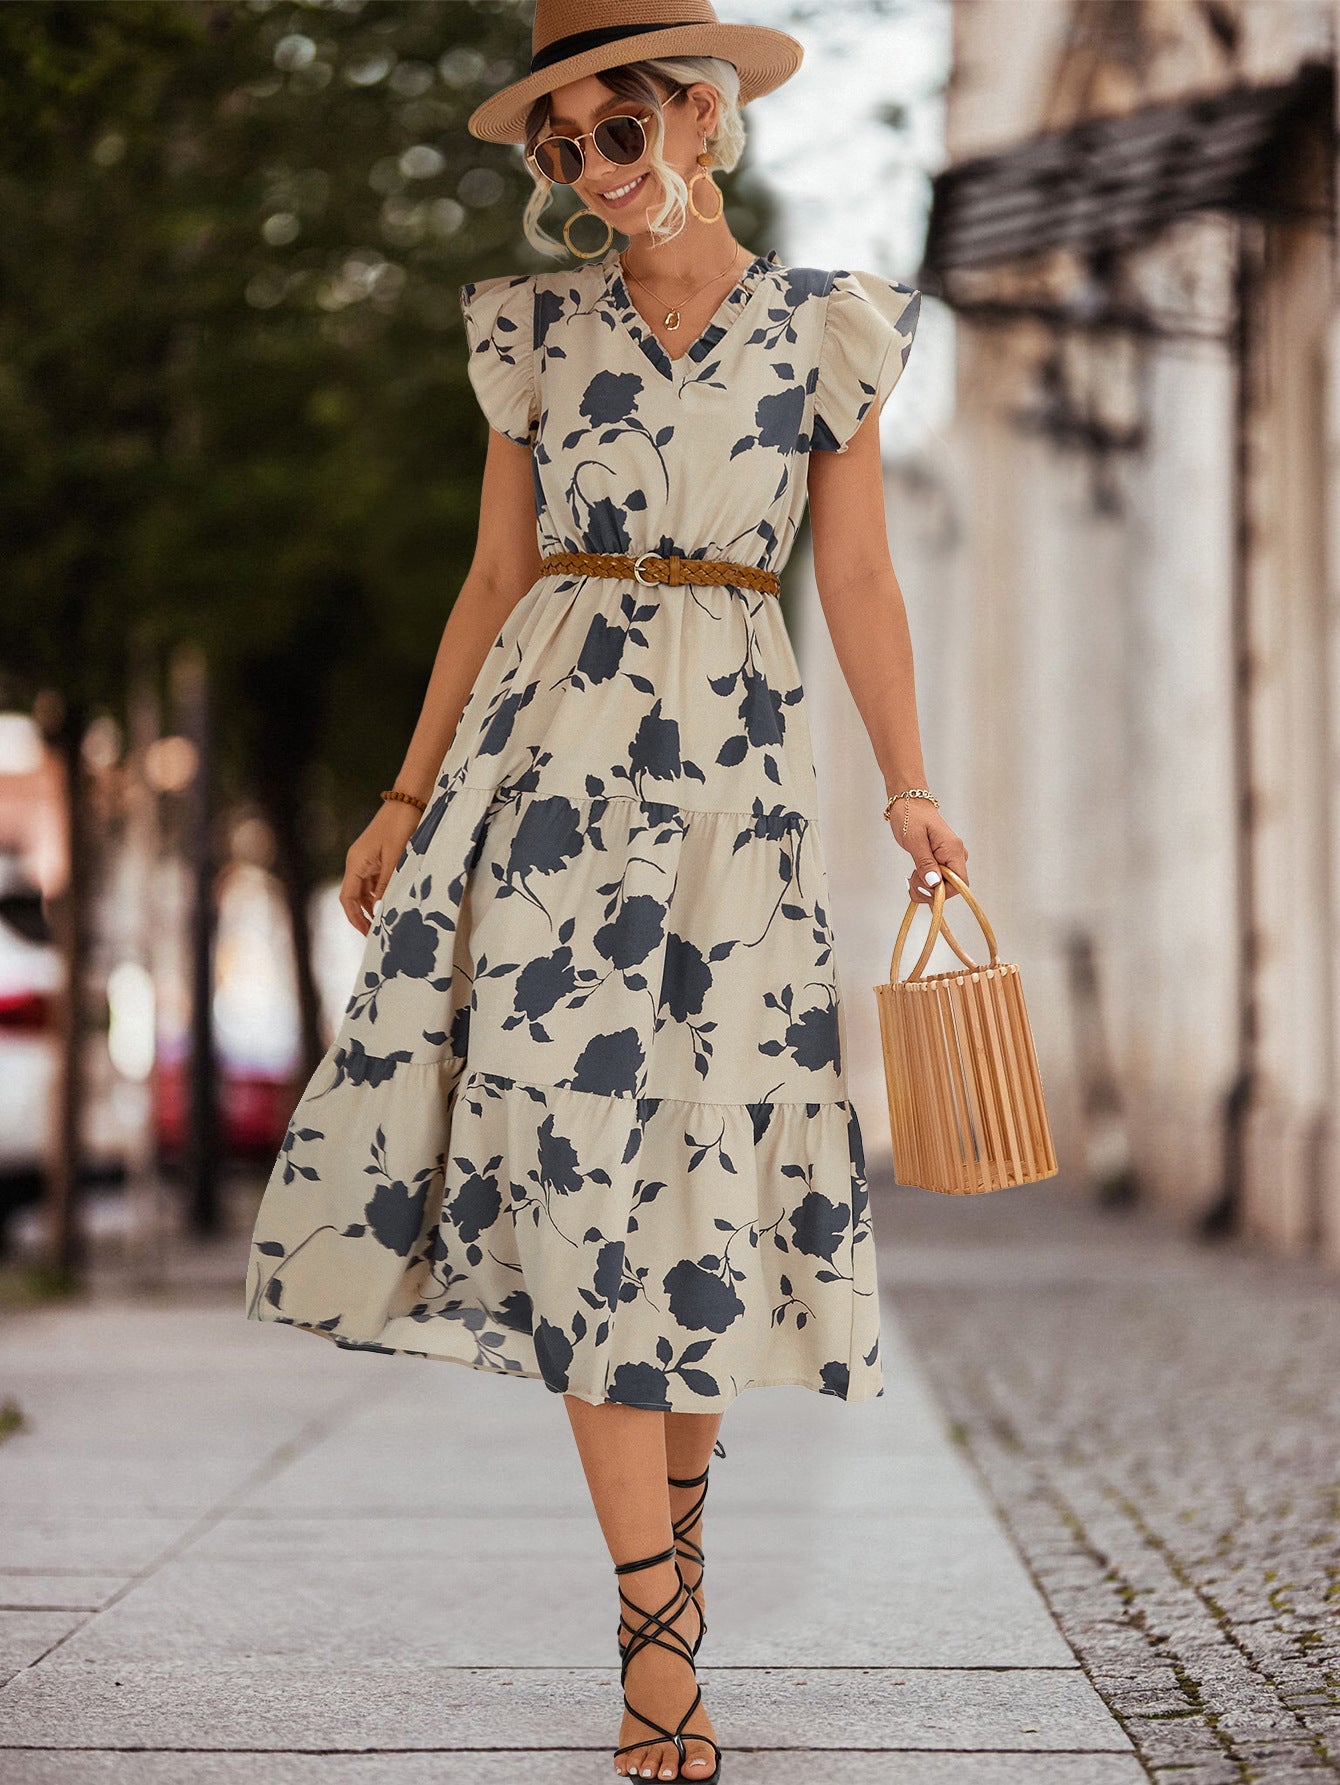 Casual V Neck Floral Print Women Dresses-Dresses-Apricot-S-Free Shipping Leatheretro